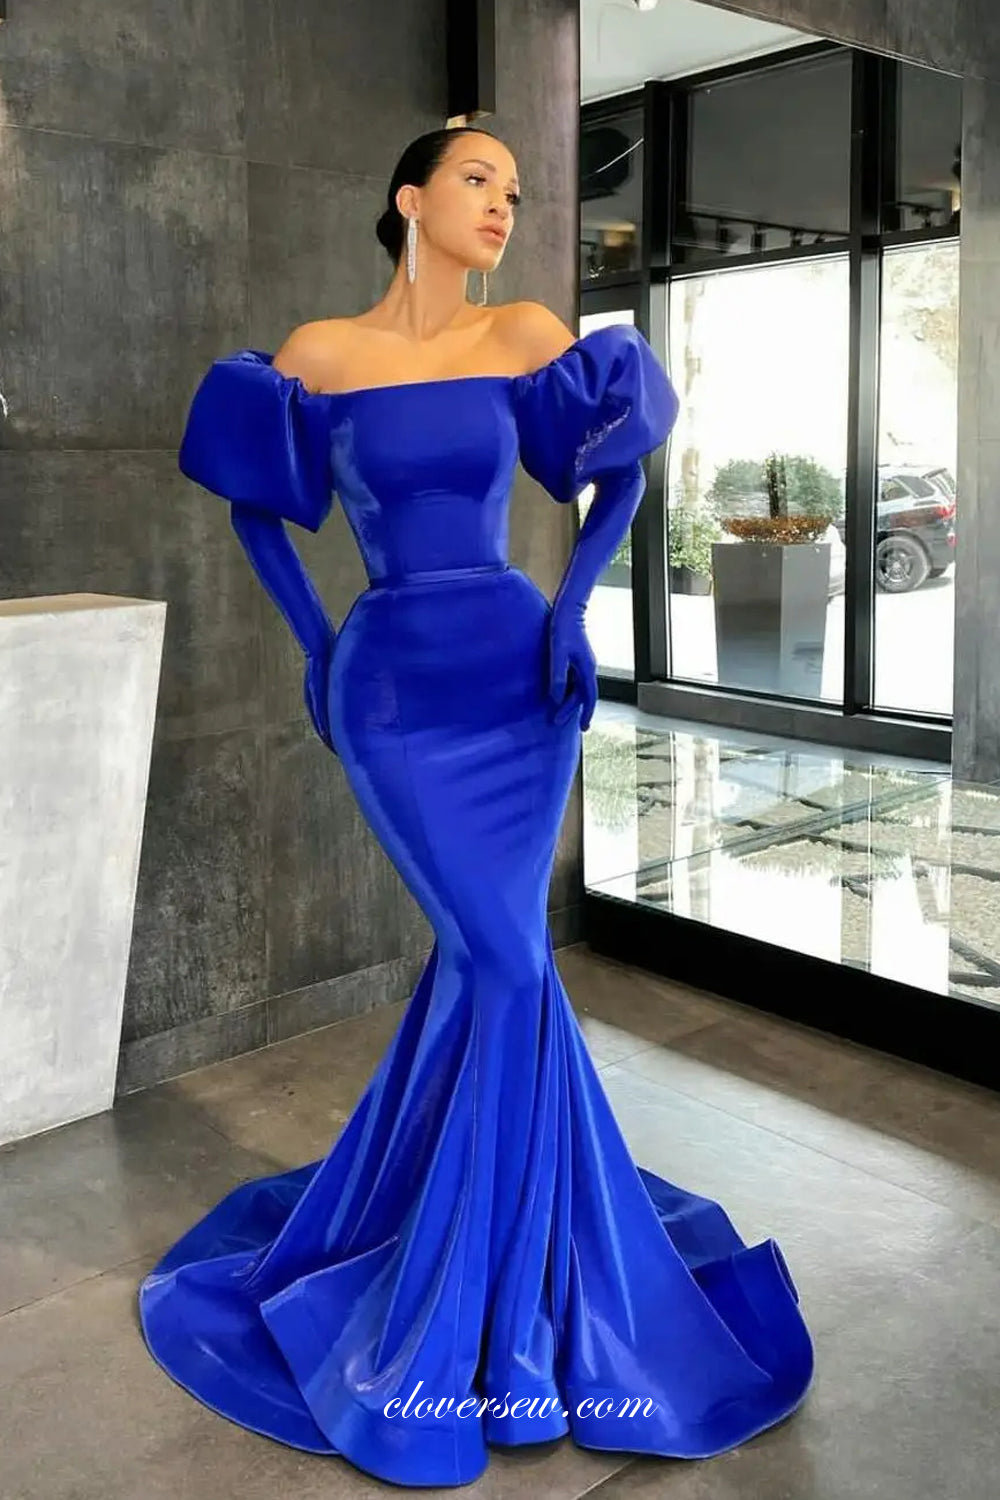 Shiny Satin Royal Blue Off The Shoulder Mermaid Prom Dresses, CP1055